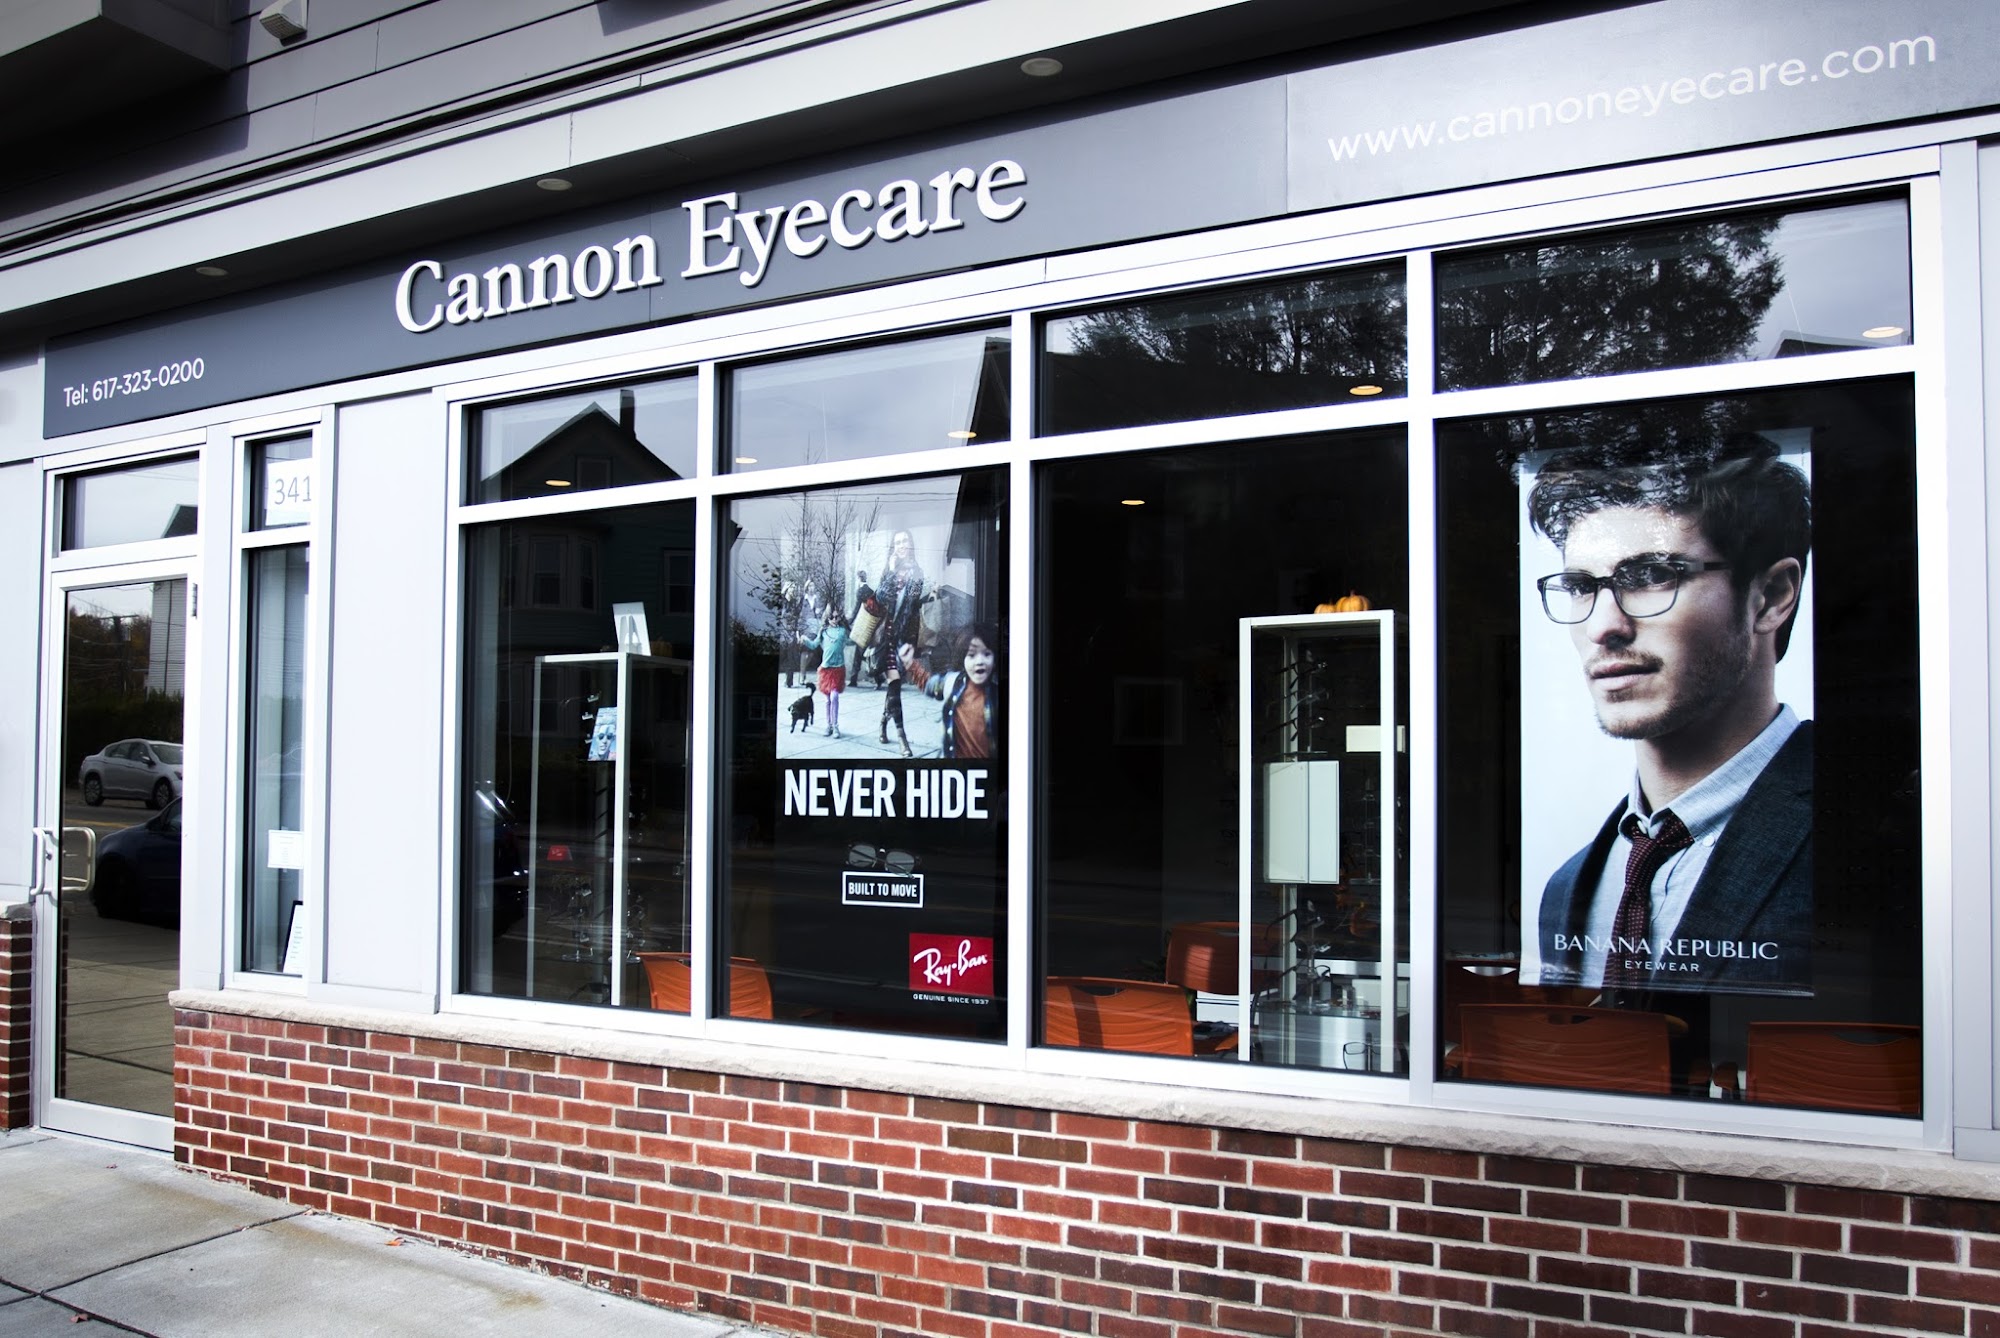 Cannon Eyecare